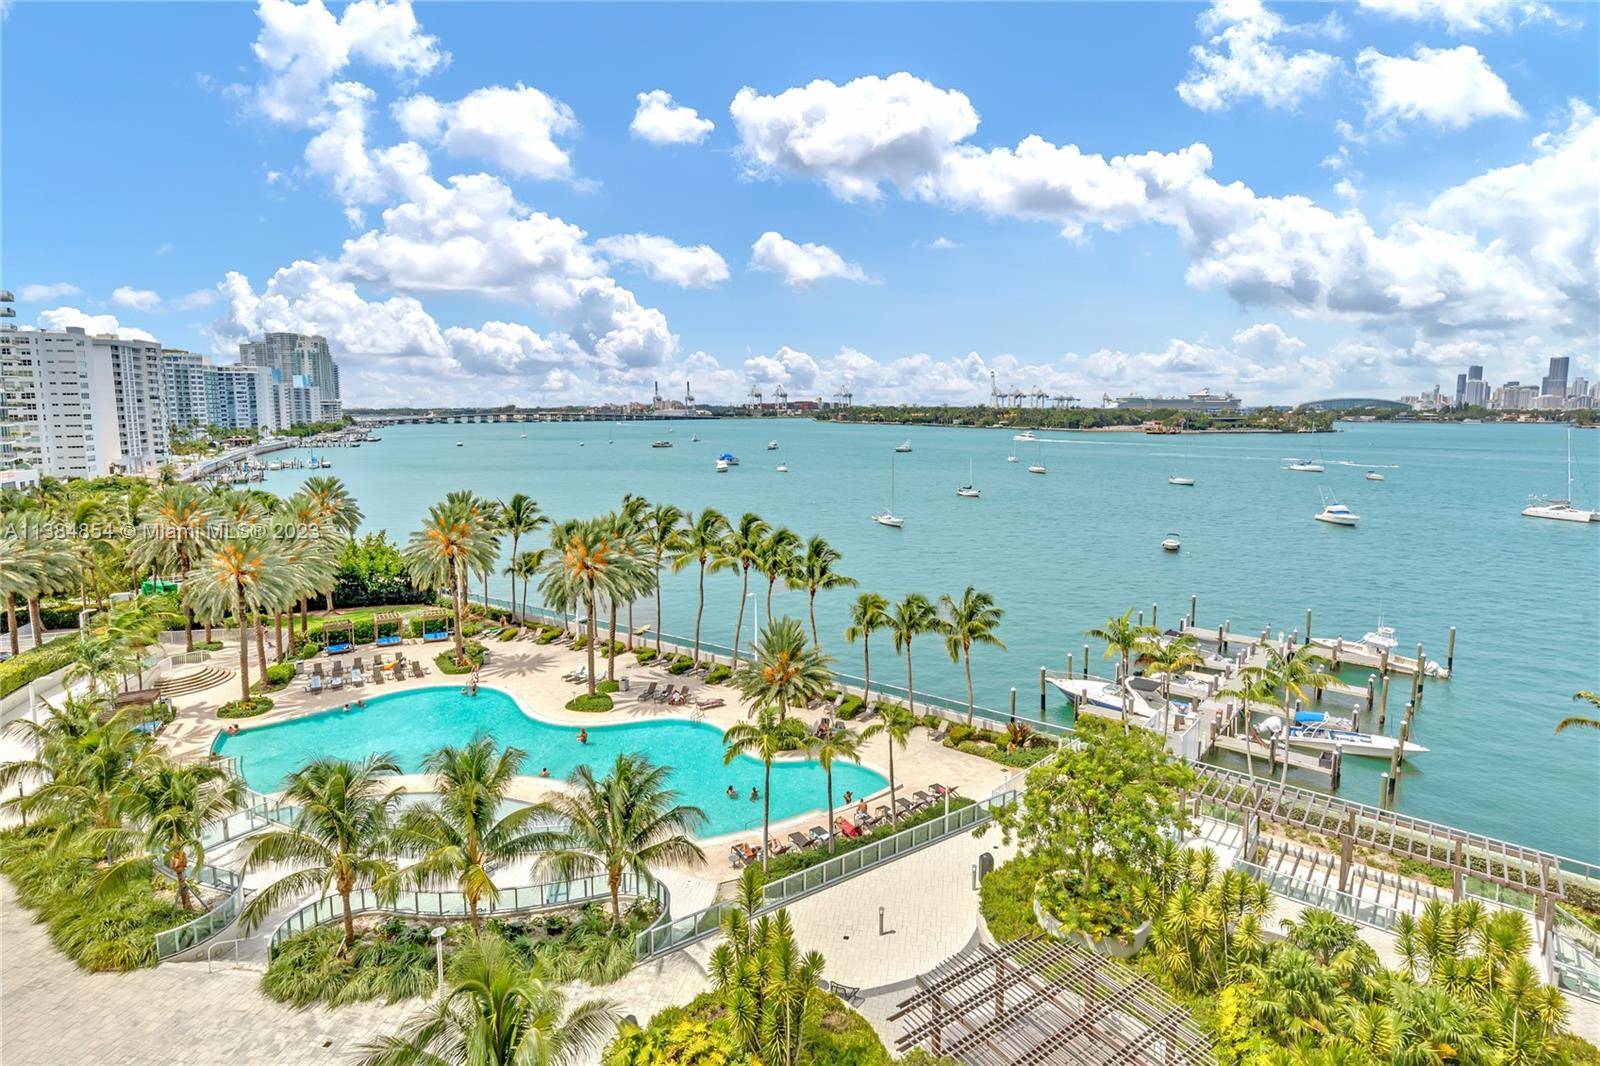 Where modern style meets stunning views this fantastic one bedroom apartment spanning 850 square feet features a balcony to take in the breathtaking unobstructed direct views of Biscayne Bay.